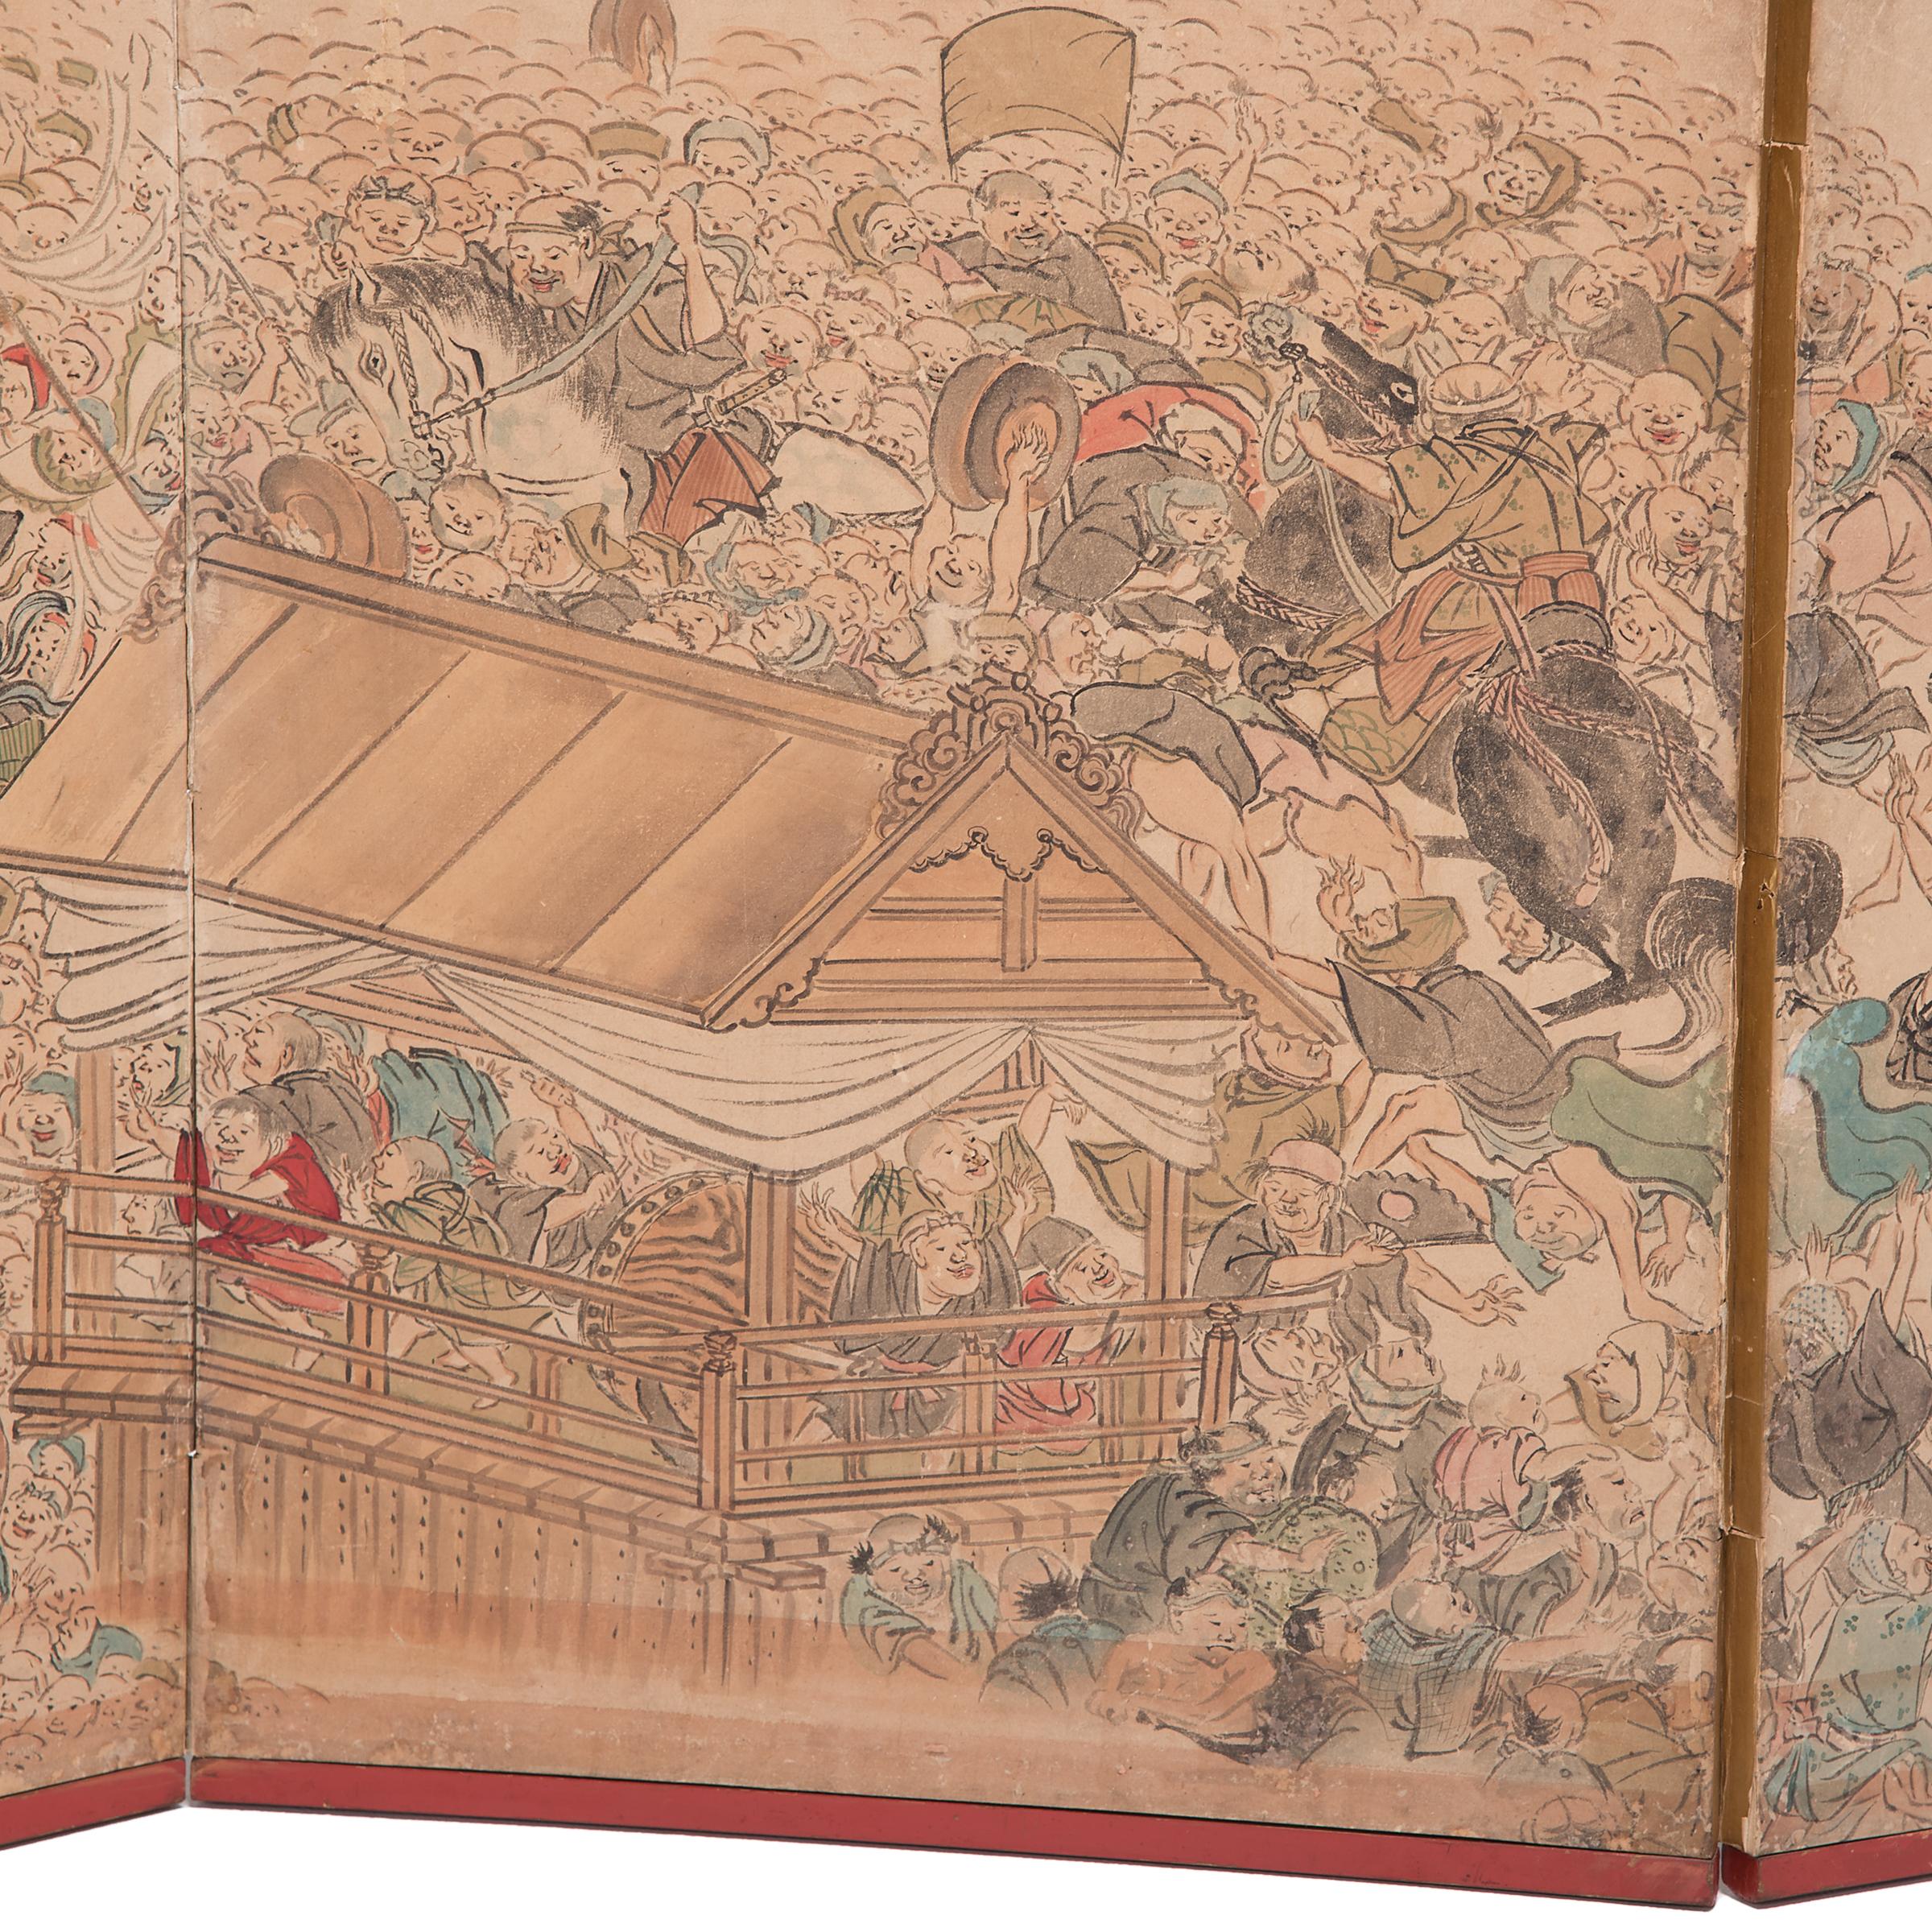 Japanese Festival Folding Screen, Paint on Paper, c. 1750 - Beige Landscape Painting by Unknown